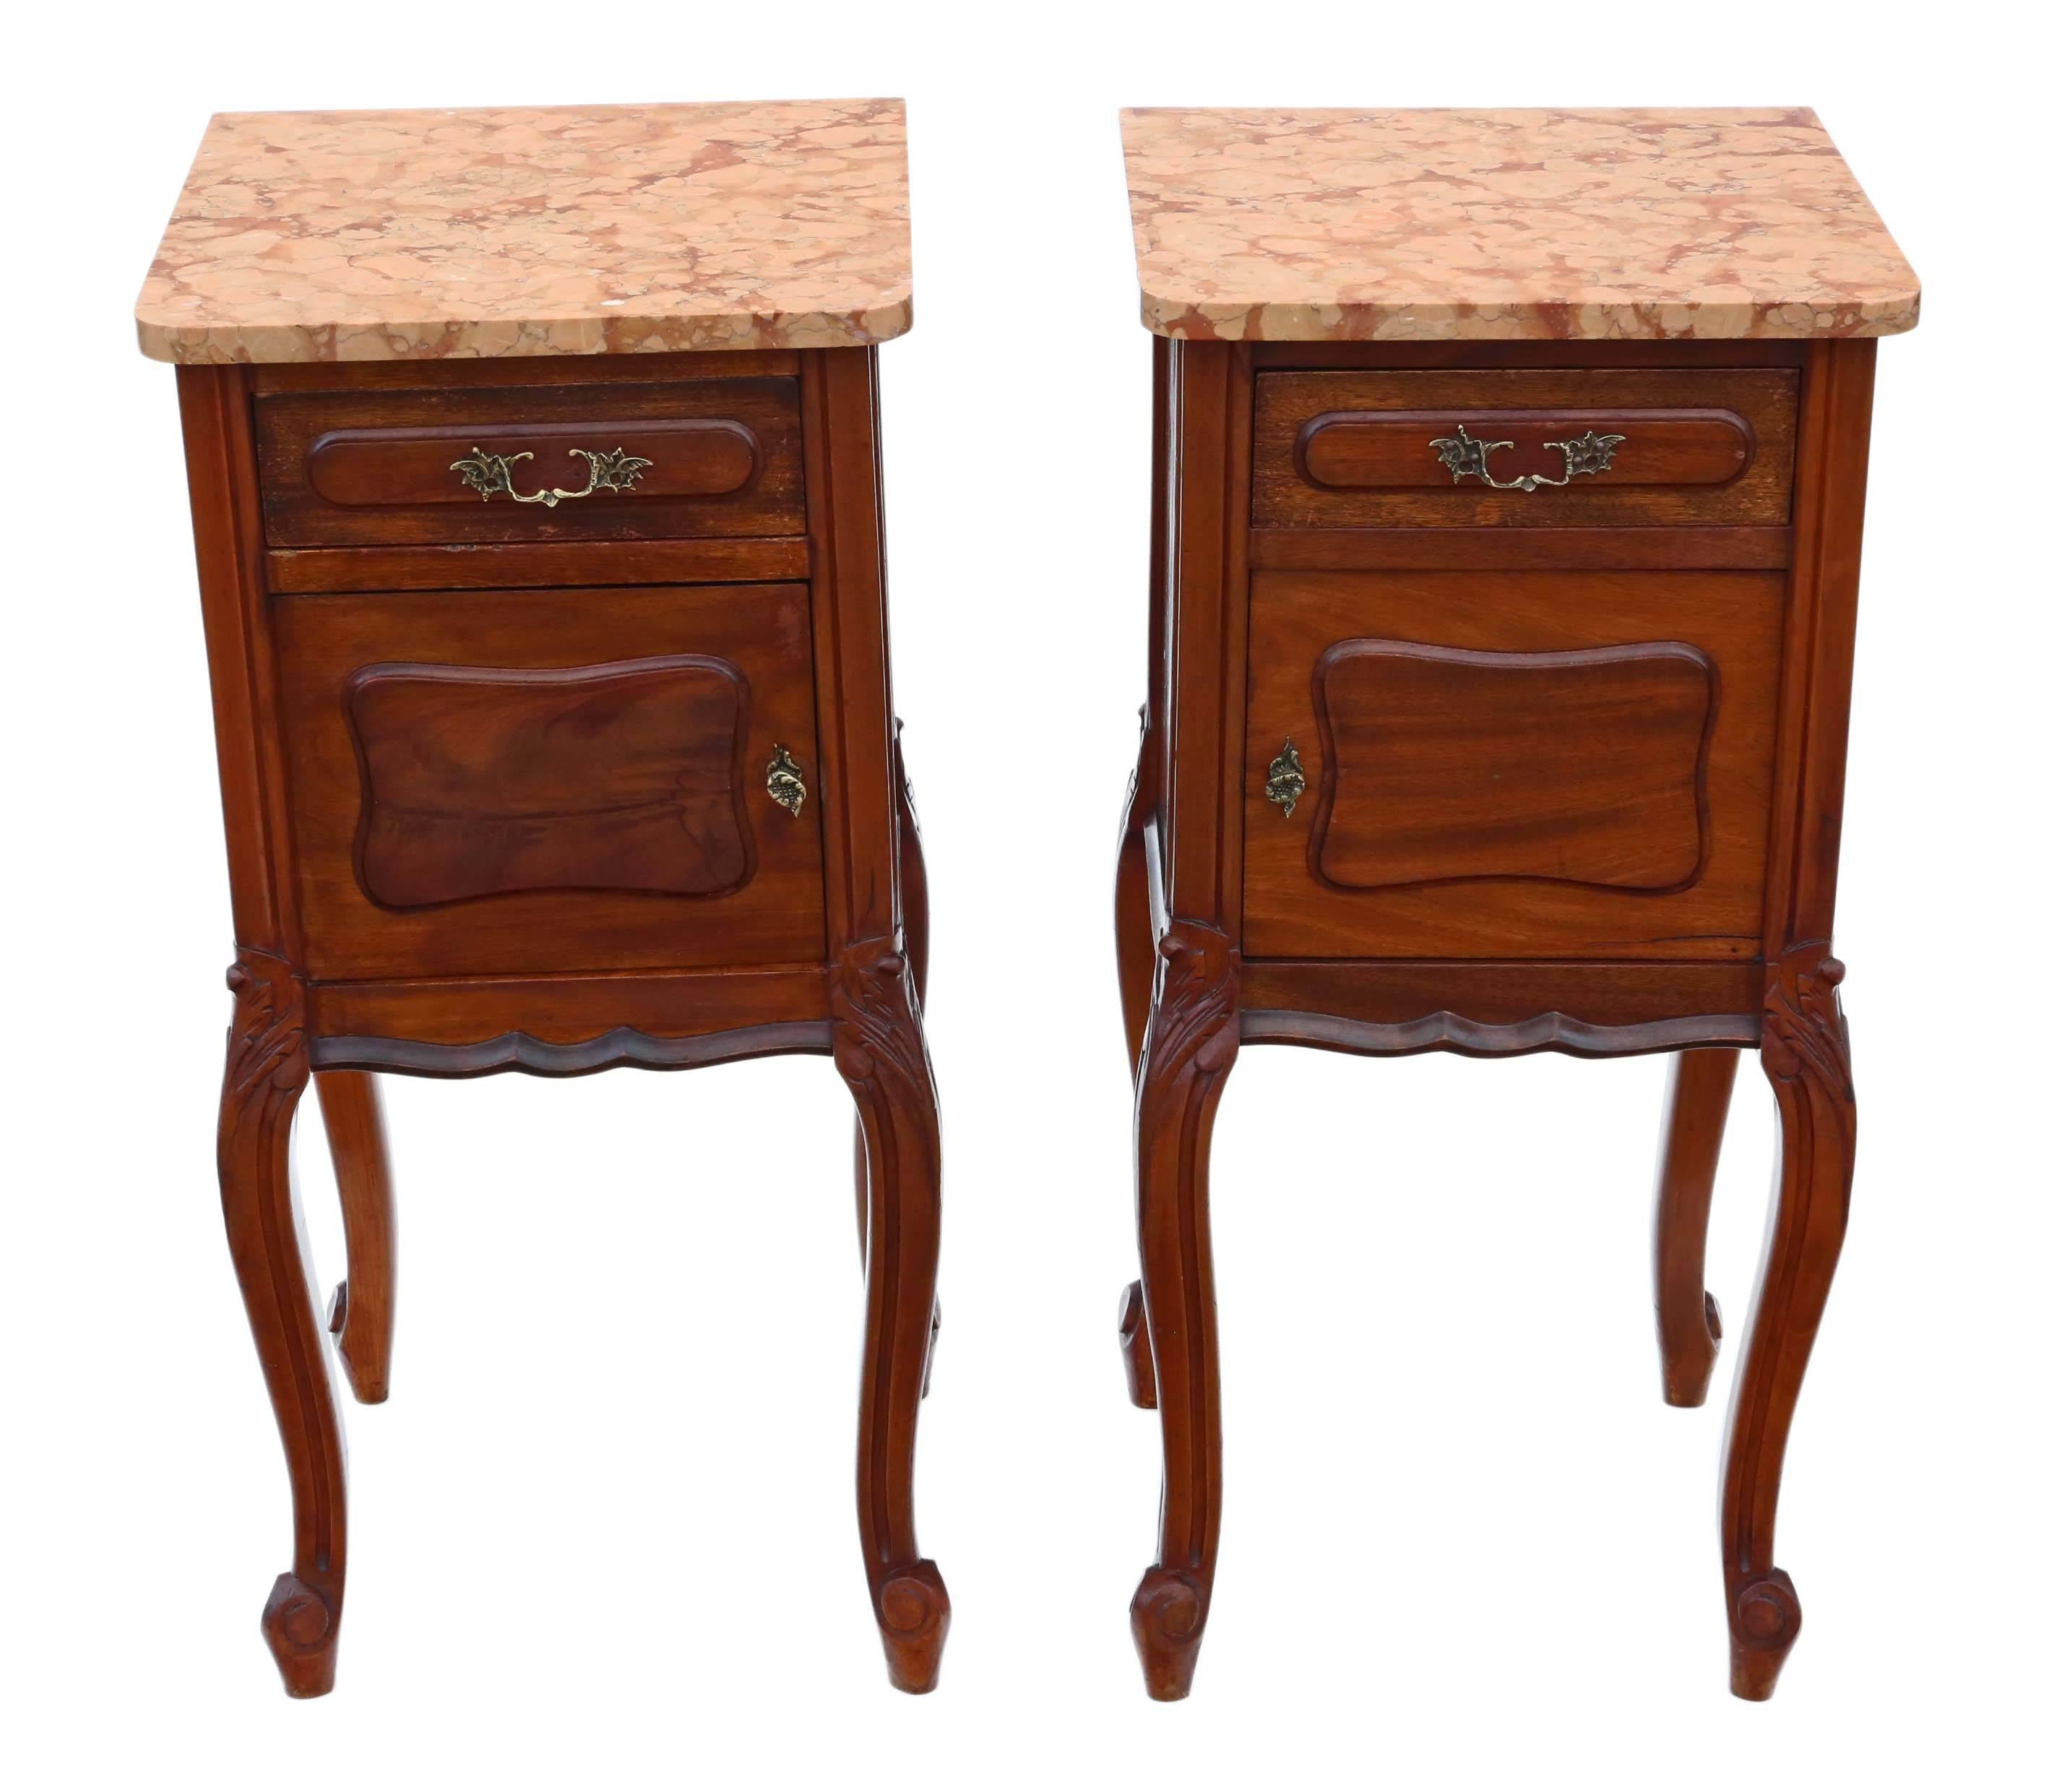 Antique pair of French walnut bedside tables, cupboards or cabinets with unfixed (as is usual) marble tops, circa 1920.

Lovely, full of age, charm and character.

No woodworm, the drawers and doors (working catches) open as they